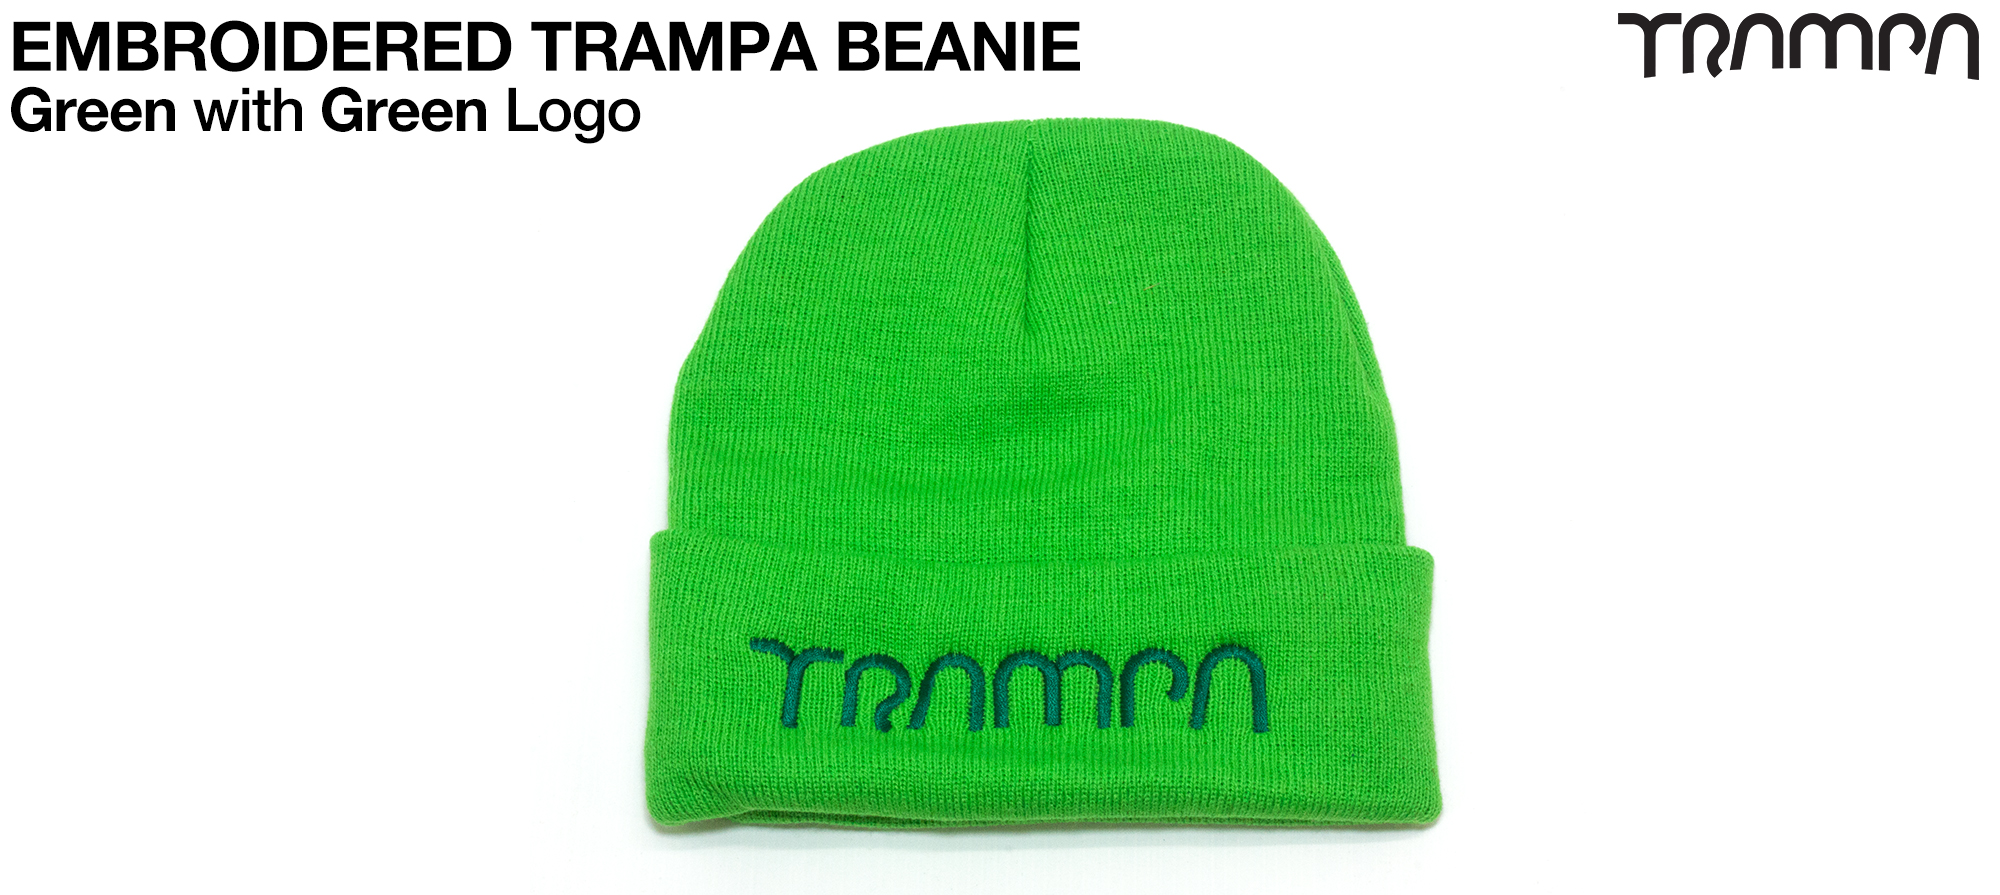 GREEN Woolie hat with GREEN TRAMPA logo